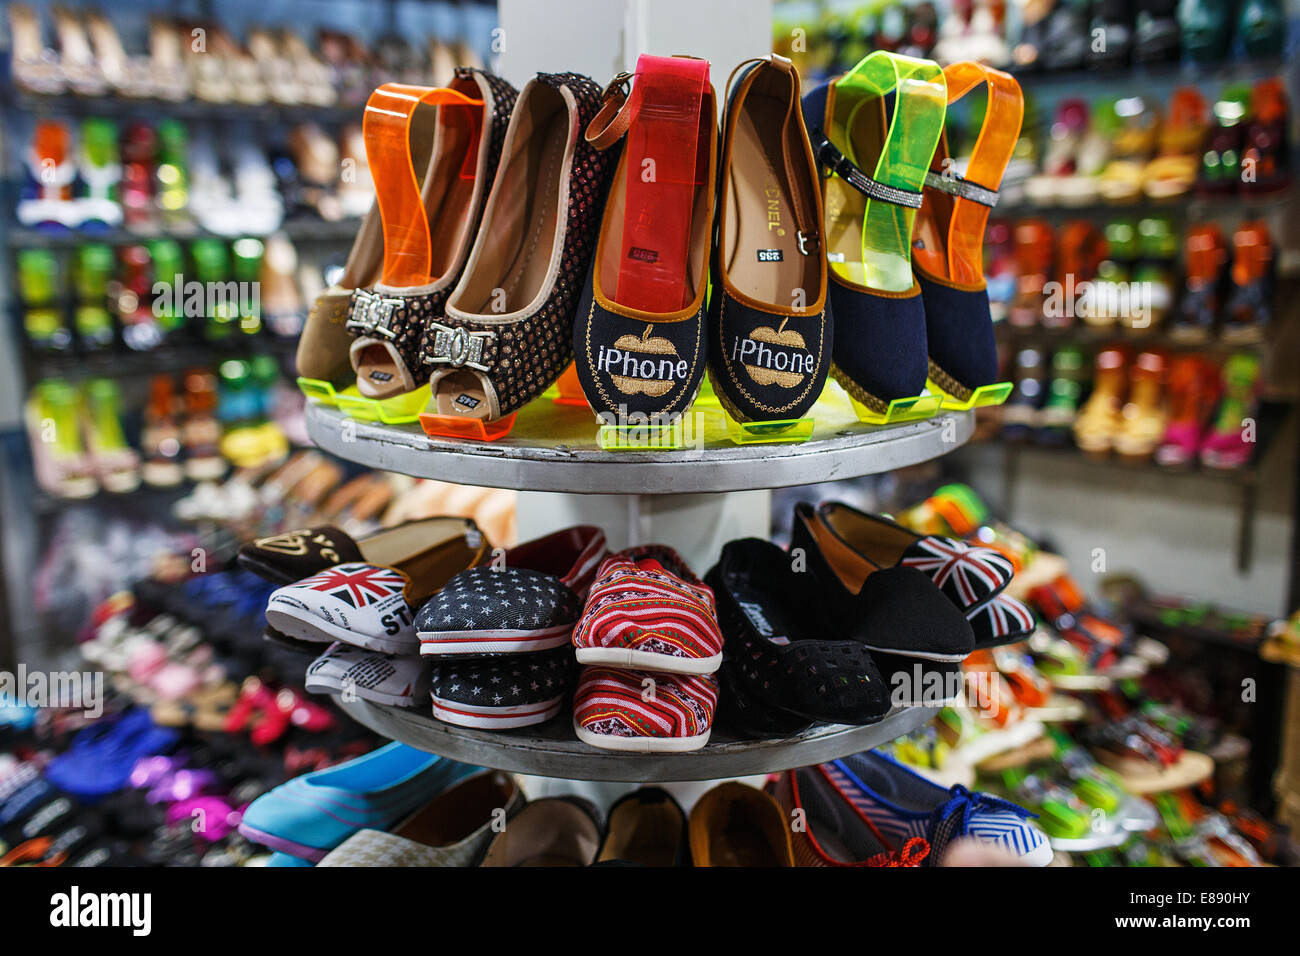 Women shoes with iPhone logo on sale at the market in Sihanoukville, Cambodia Stock Photo